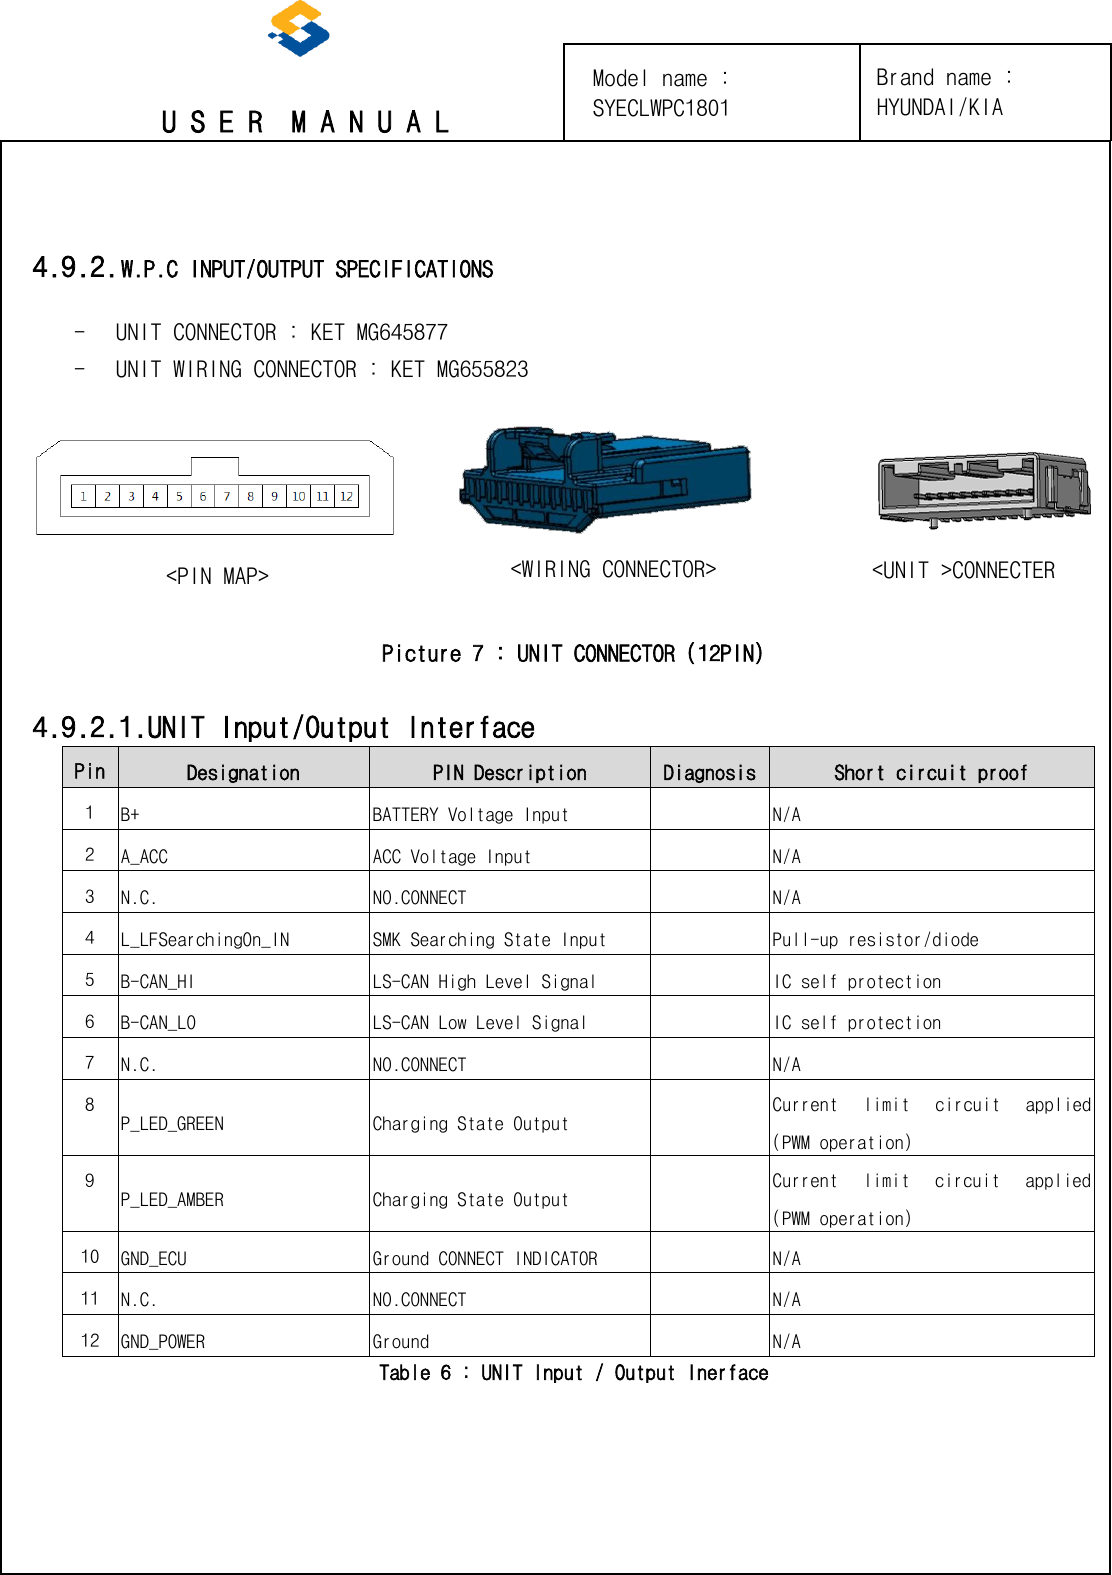 U S E R  M A N U A L Model name : SYECLWPC1801 4.9.2. W.P.C INPUT/OUTPUT SPECIFICATIONS - UNIT CONNECTOR : KET MG645877 - UNIT WIRING CONNECTOR : KET MG655823 Picture 7 : UNIT CONNECTOR (12PIN) 4.9.2.1.UNIT Input/Output Interface Pin Designation PIN Description Diagnosis Short circuit proof 1 B+ BATTERY Voltage Input N/A 2 A_ACC ACC Voltage Input N/A 3 N.C. NO.CONNECT N/A 4 L_LFSearchingOn_IN SMK Searching State Input Pull-up resistor/diode 5 B-CAN_HI LS-CAN High Level Signal IC self protection 6 B-CAN_LO LS-CAN Low Level Signal IC self protection 7 N.C. NO.CONNECT N/A 8 P_LED_GREEN Charging State Output Current  limit  circuit  applied (PWM operation) 9 P_LED_AMBER Charging State Output Current  limit  circuit  applied (PWM operation) 10 GND_ECU Ground CONNECT INDICATOR N/A 11 N.C. NO.CONNECT N/A 12 GND_POWER Ground N/A Table 6 : UNIT Input / Output Inerface &lt;UNIT &gt;CONNECTER &lt;WIRING CONNECTOR&gt; &lt;PIN MAP&gt; Brand name : HYUNDAI/KIA 